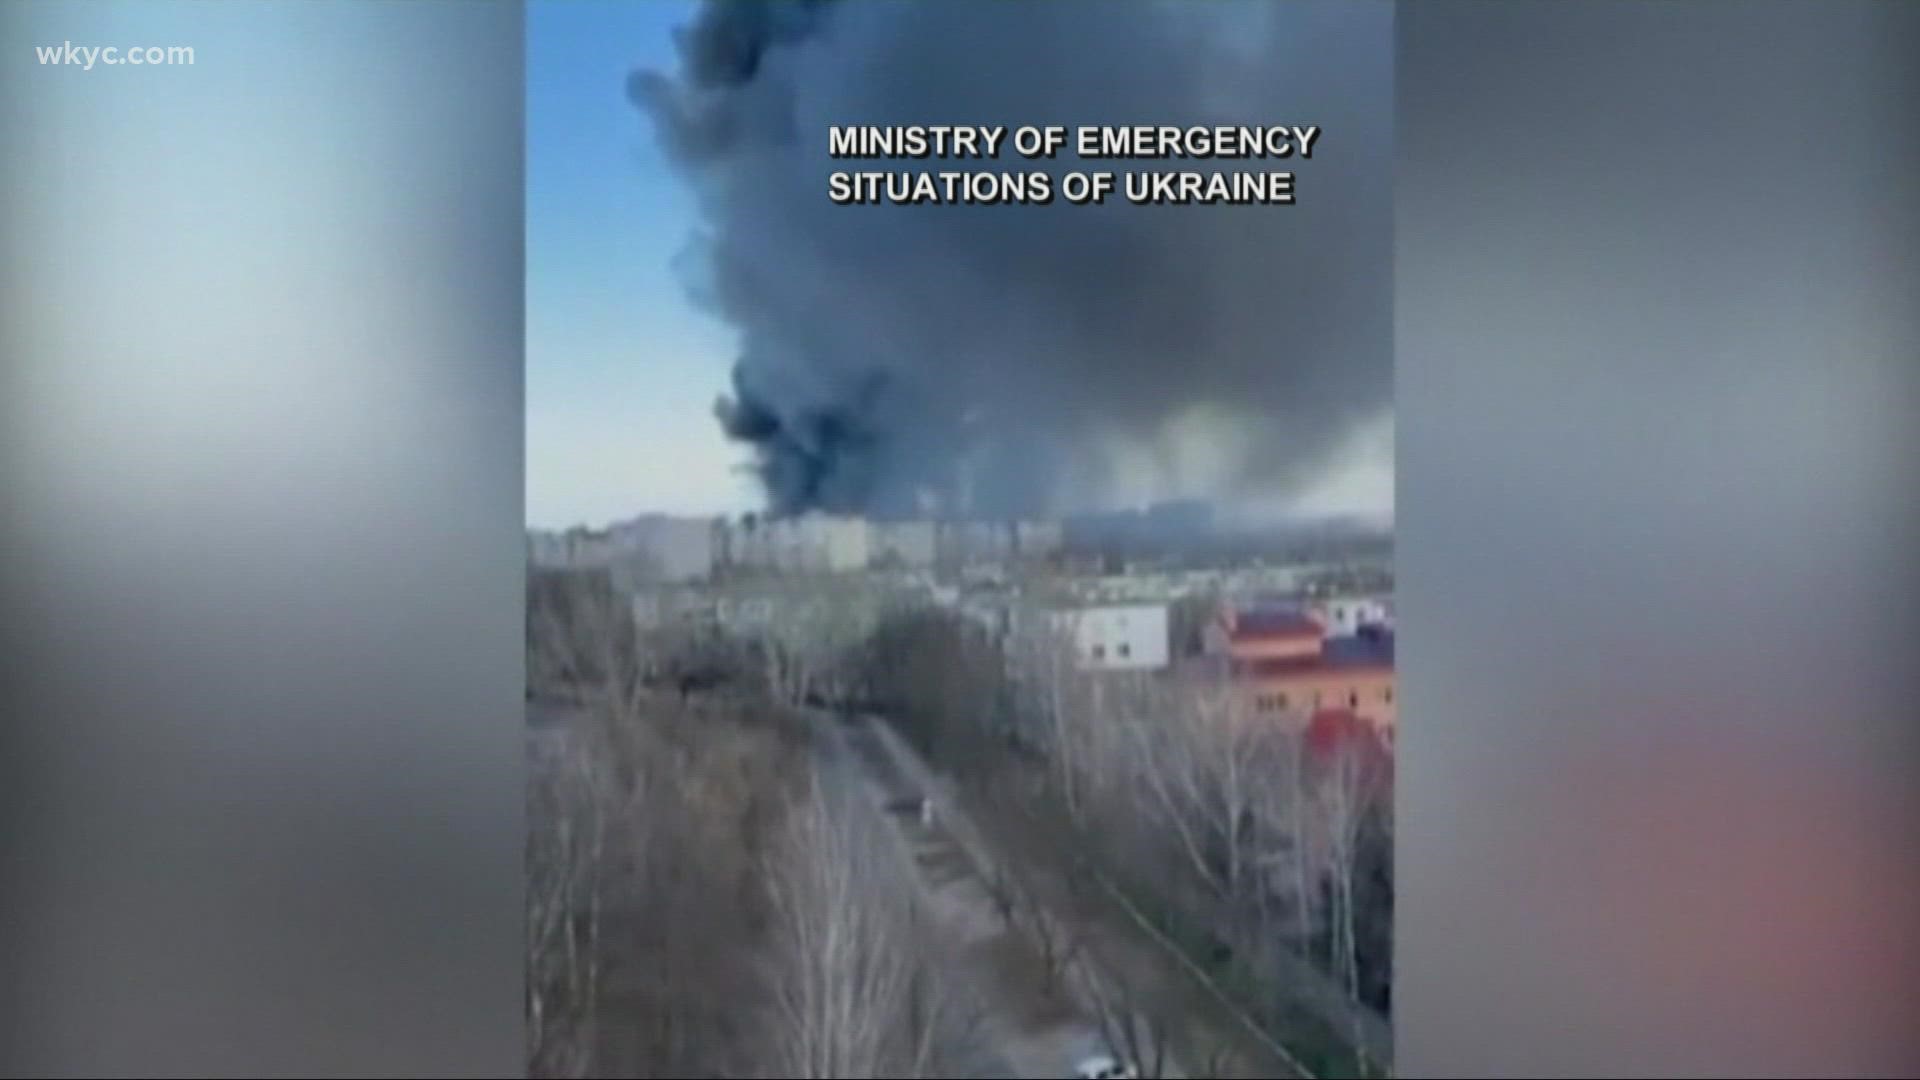 Here's a live look at the developing situation as Russia's attack on Ukraine continues.